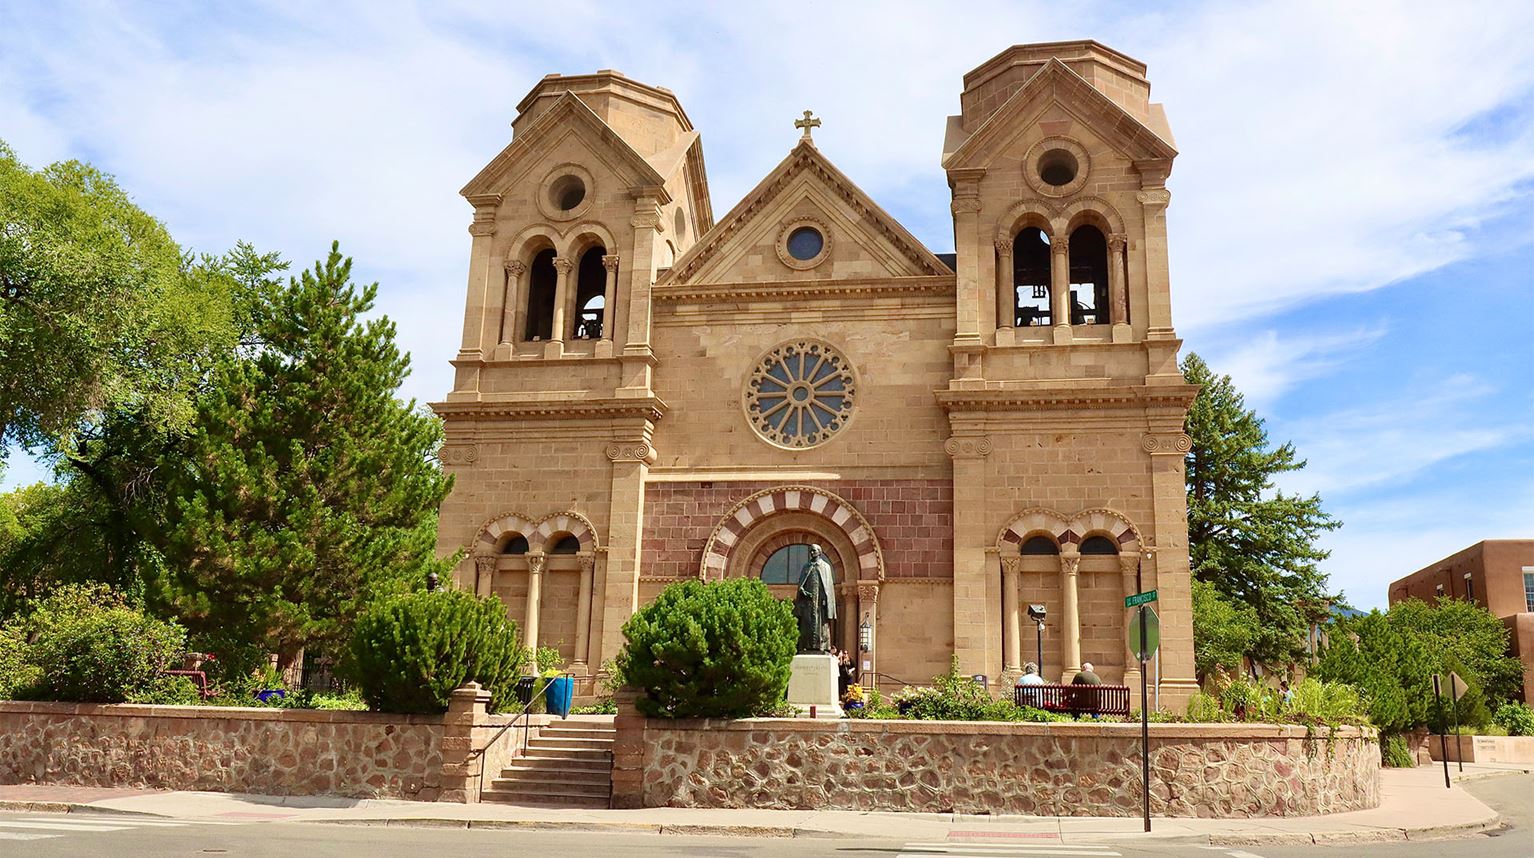 External of Cathedral of St. Francis of Assisi in New Mexico